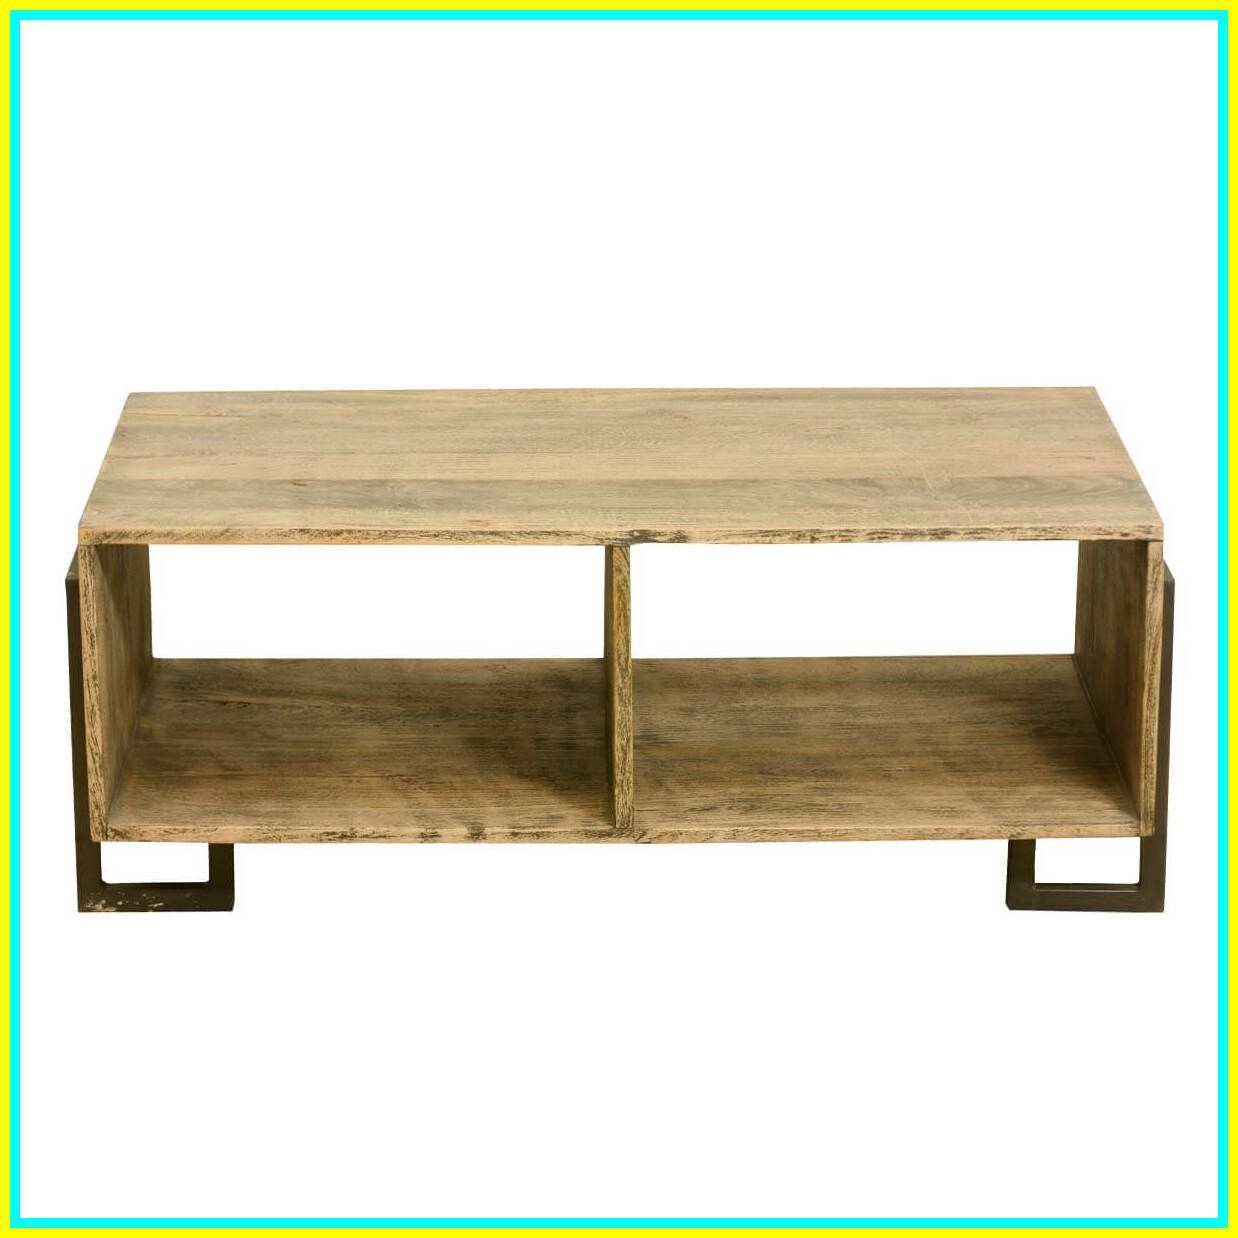 59 Reference Of Low Solid Wood Tv Stand In 2020 | Solid Inside Low Oak Tv Stands (View 13 of 15)